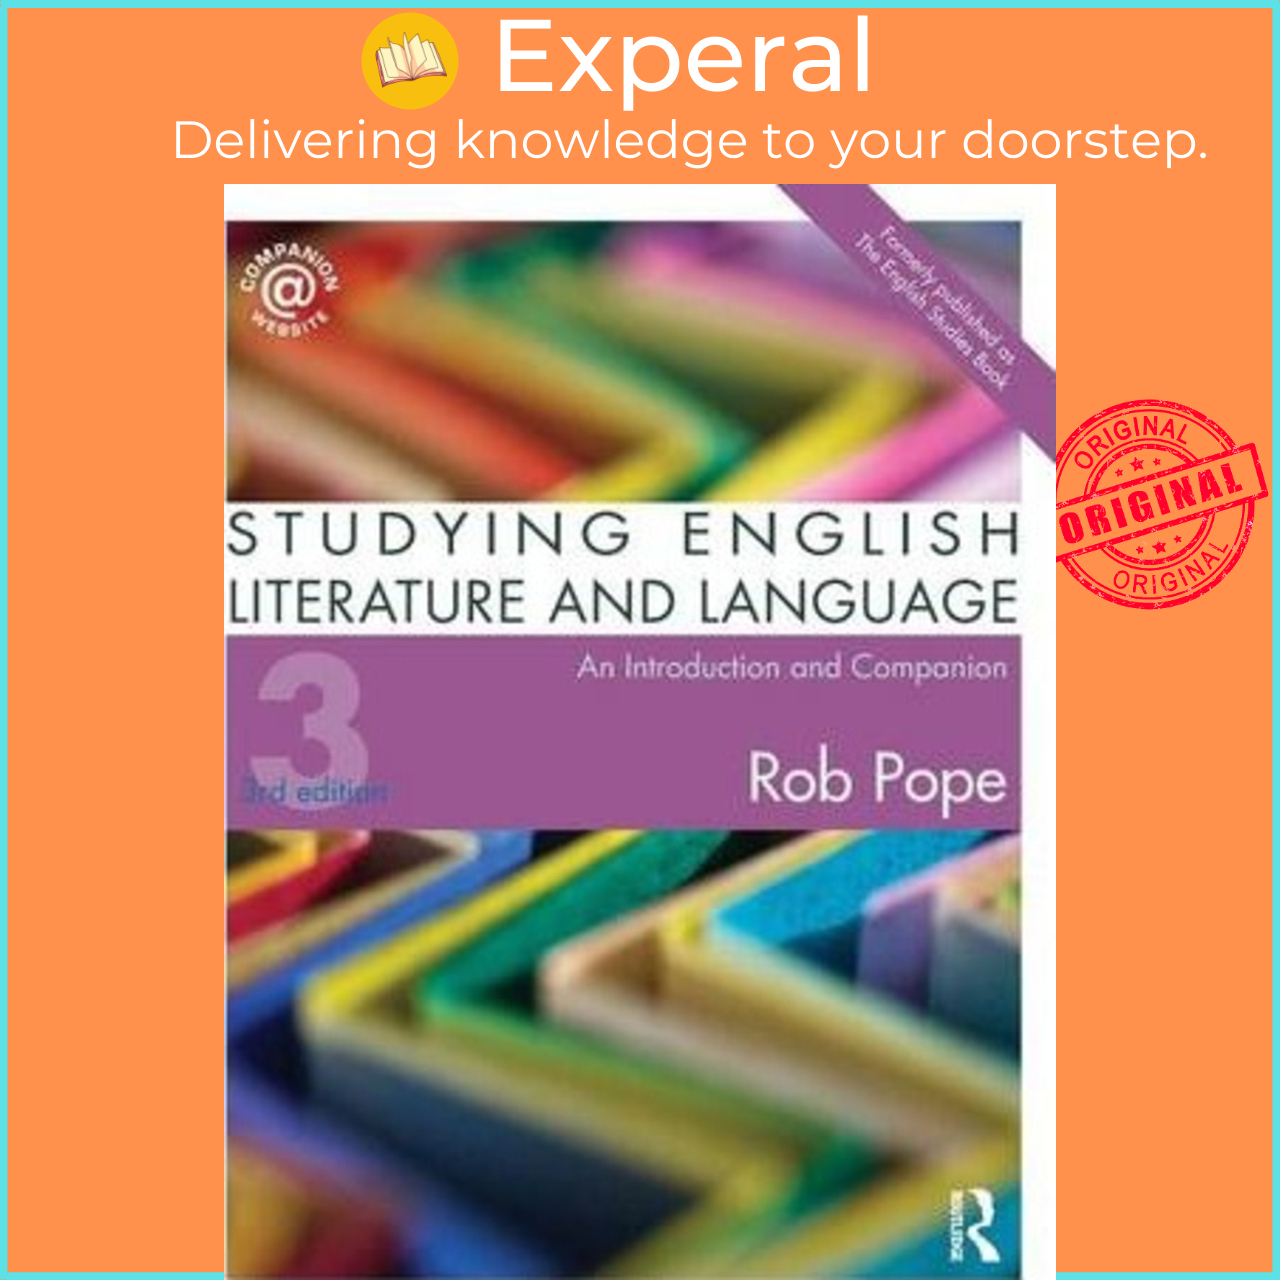 Companion　Studying　and　edition,　Literature　English　Pope　(UK　and　Language　Rob　An　by　Introduction　paperback)　Lazada　Singapore